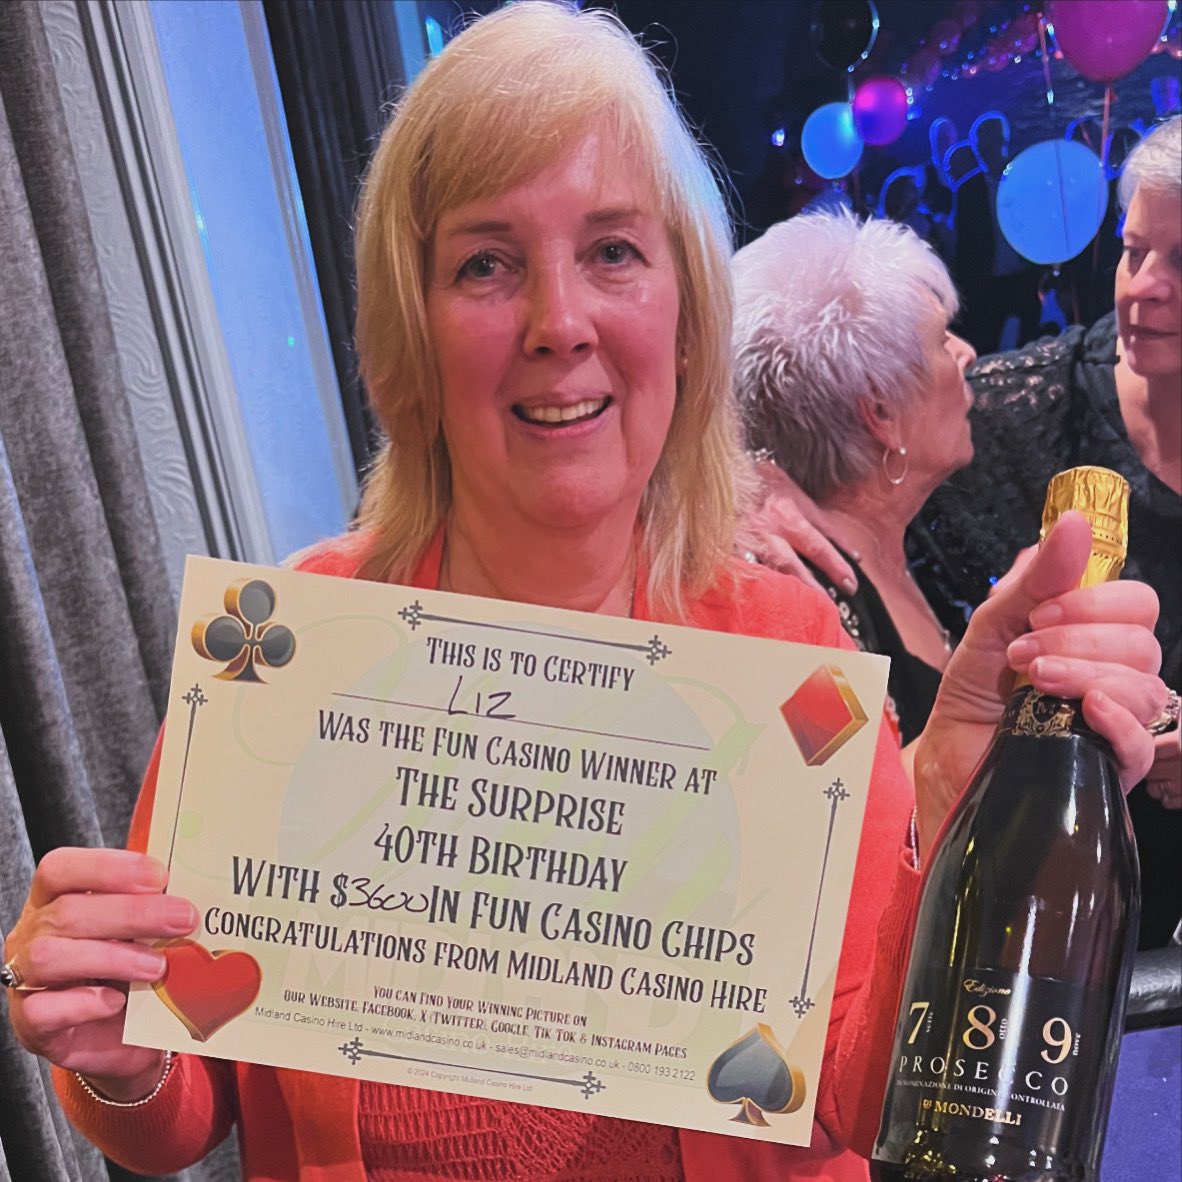 🎉 Liz won the fun casino at the Surprise 40th Birthday bash in Worcester! 🎲✨ She conquered with a whopping 3600 fun casino chips! #EntertainmentExtravaganza #BirthdayBash #40andThriving #EventElegance #FunCasinos #WorcesterWins #MidlandsMagic #CasinoNights #MemorableMoments